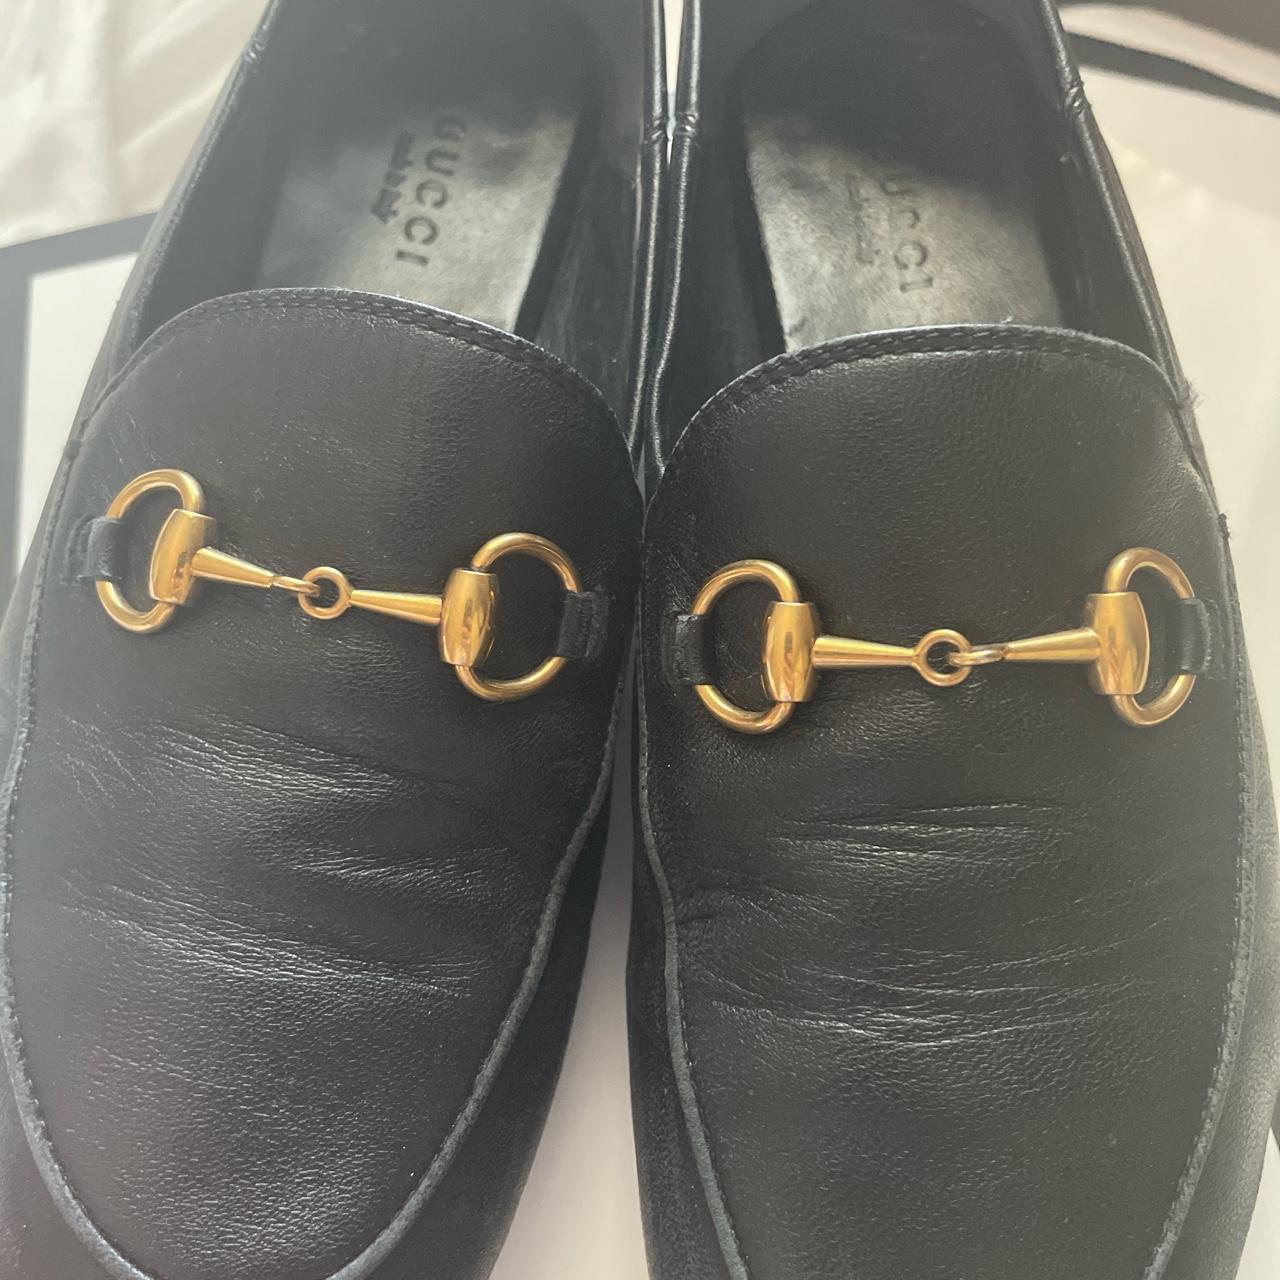 Product Image 1 - Black leather with Gold clasps,